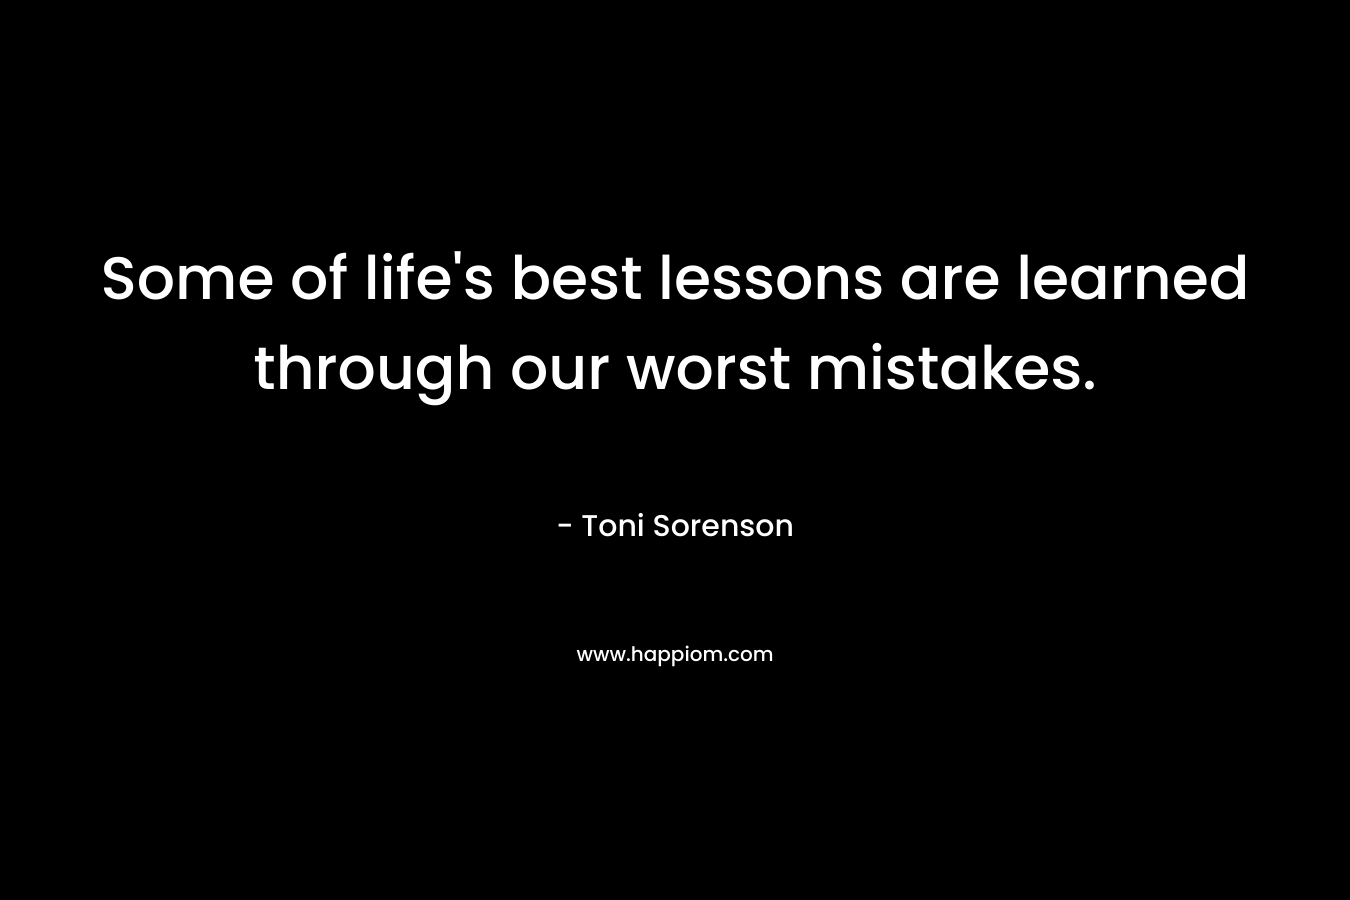 Some of life's best lessons are learned through our worst mistakes.